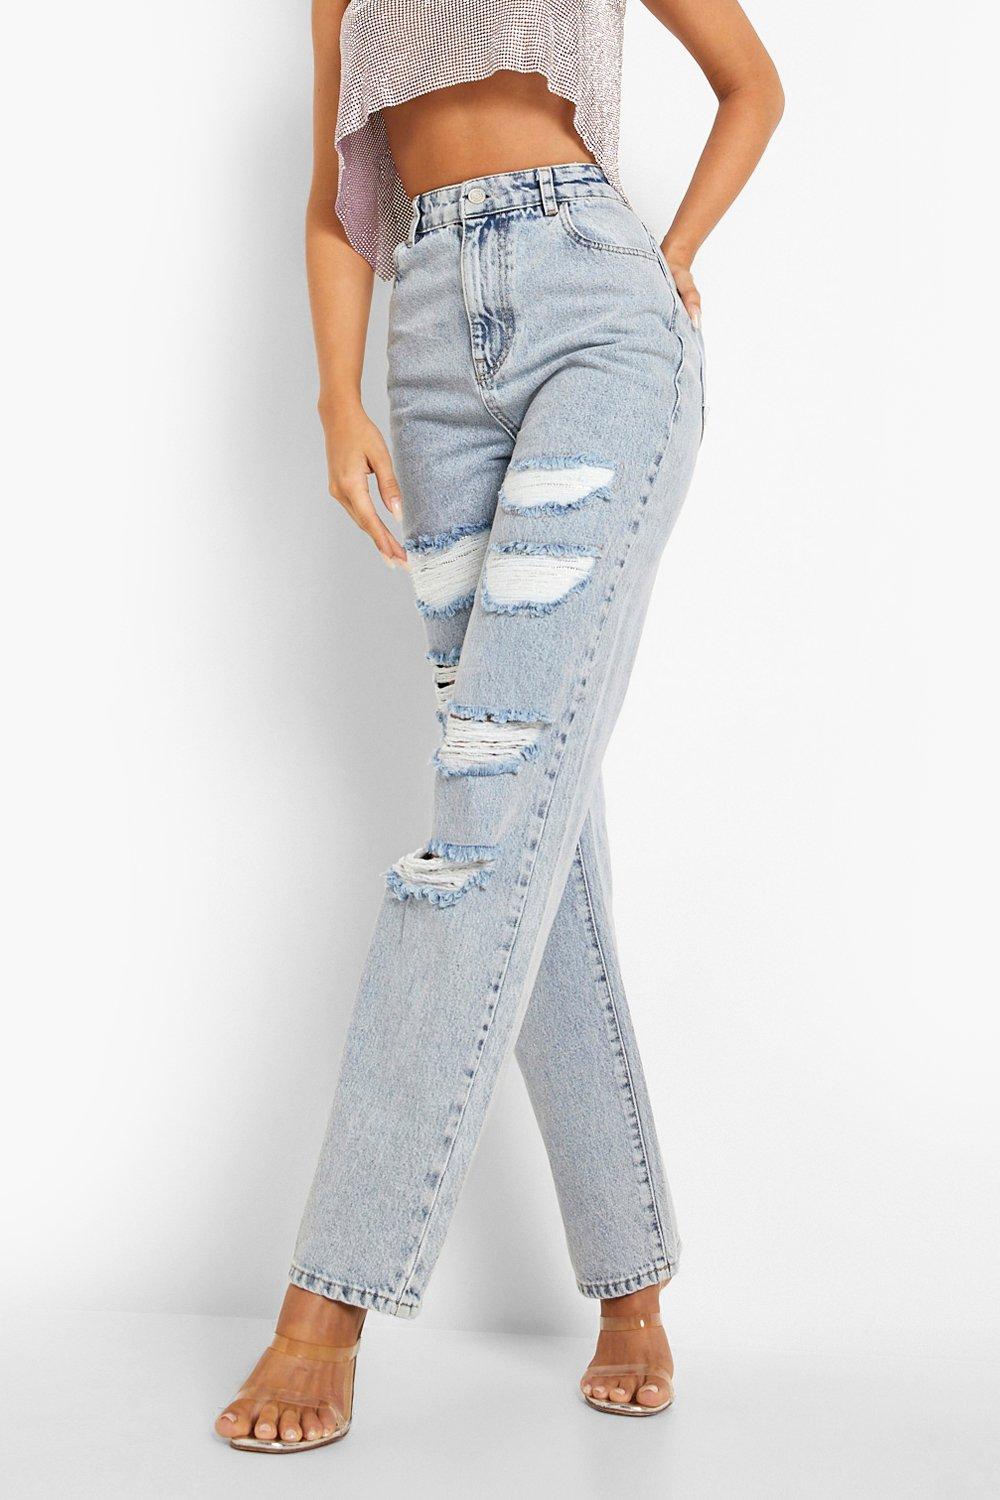 Blue Boohoo Denim Basics High Waisted Extreme Ripped Straight Fit Jeans in Light Wash Womens Jeans Boohoo Jeans 